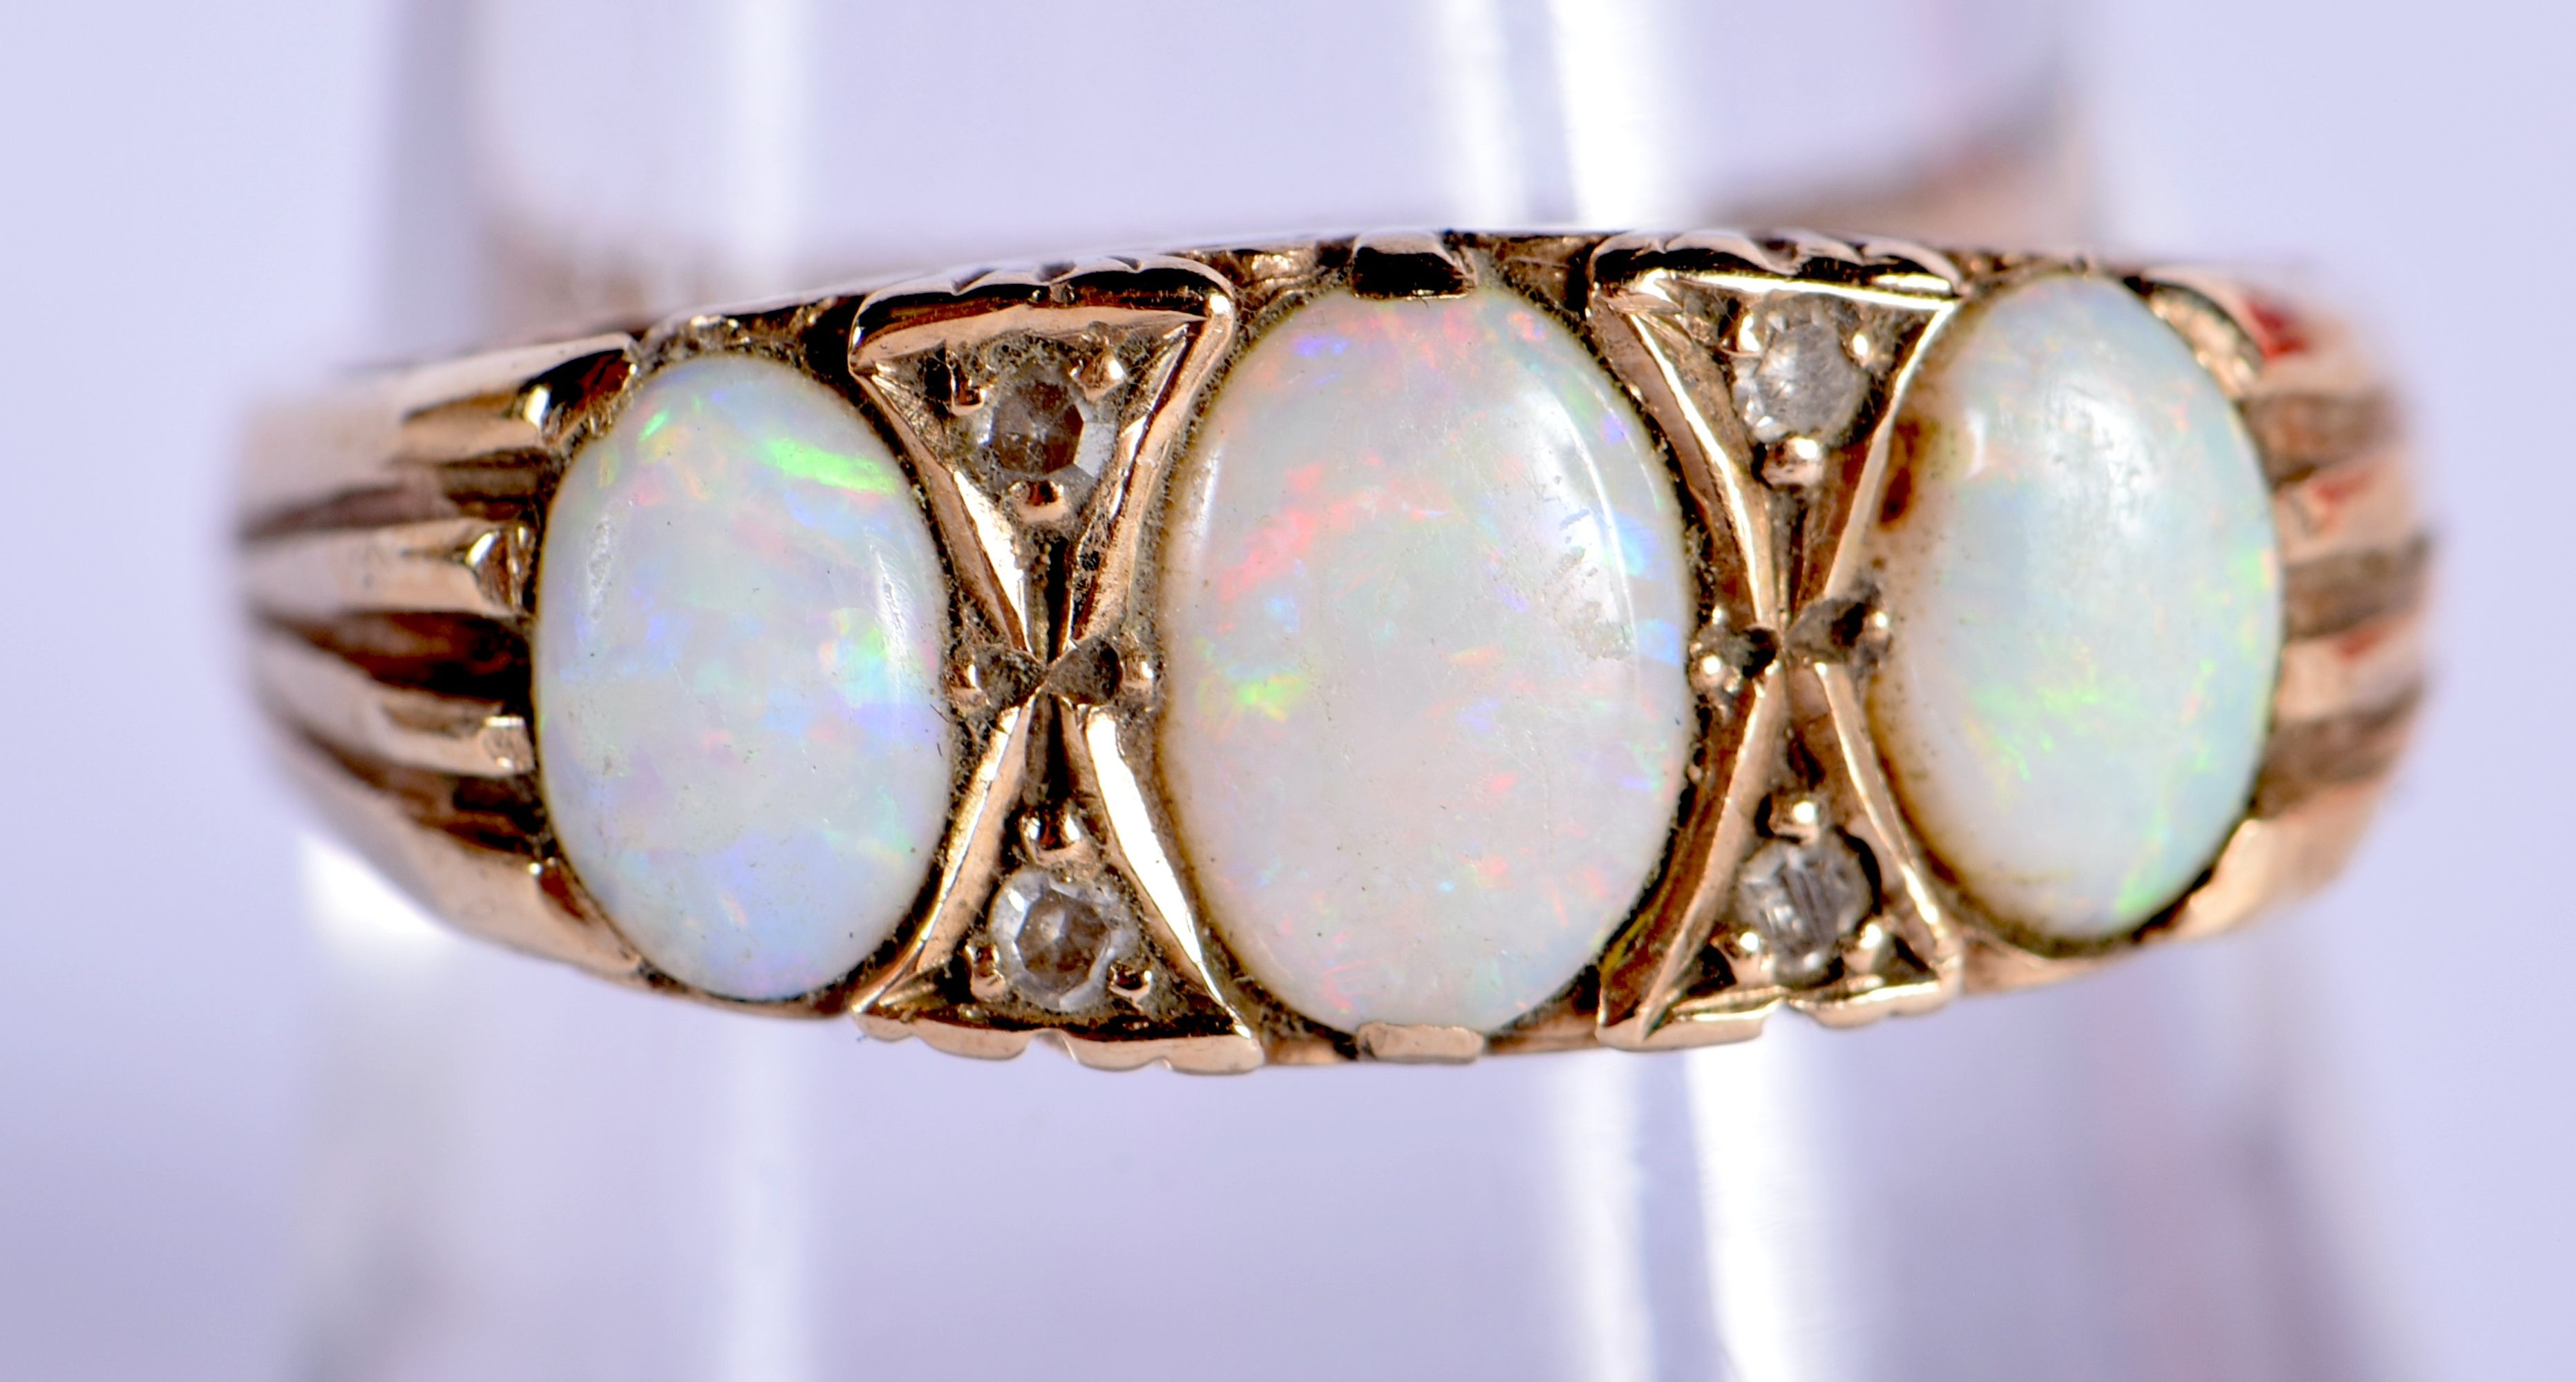 A 9CT GOLD AND OPAL RING. Size P, weight 2.96g